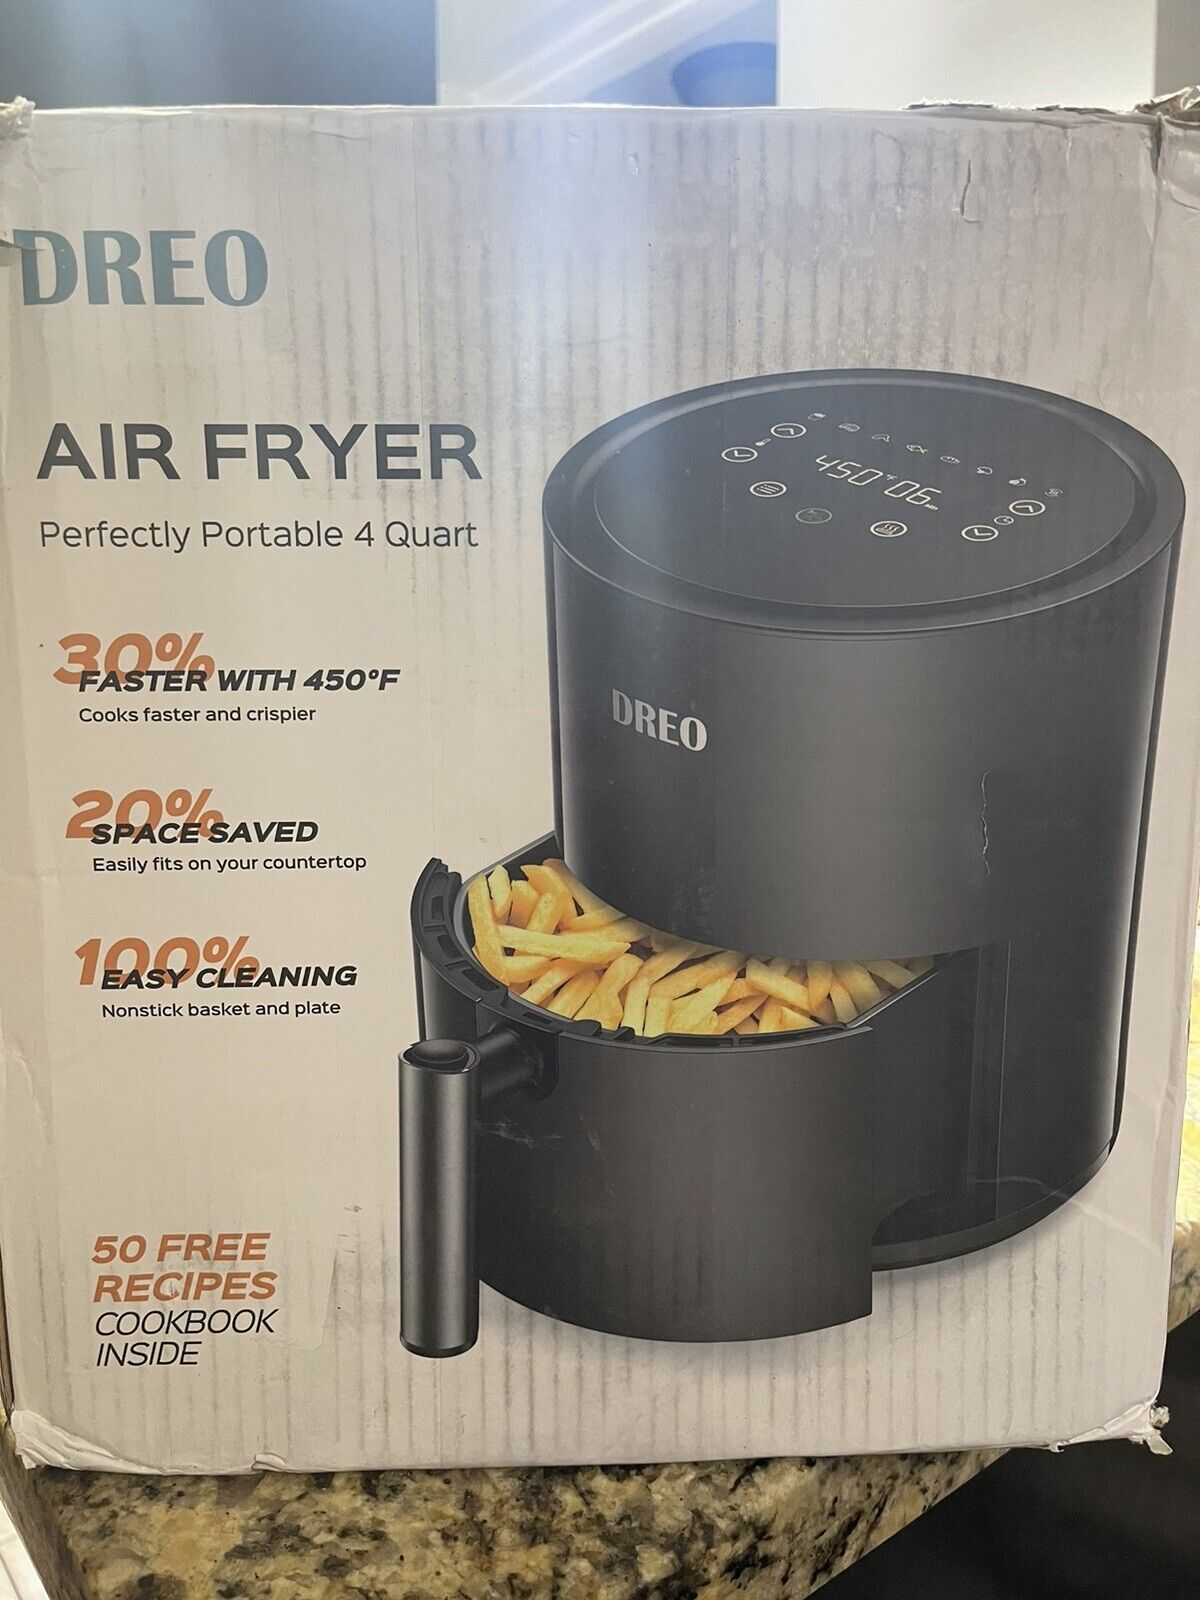 Dreo Air Fryer - 100℉ to 450℉, 4 Quart Hot Oven Cooker with 50 Recipes